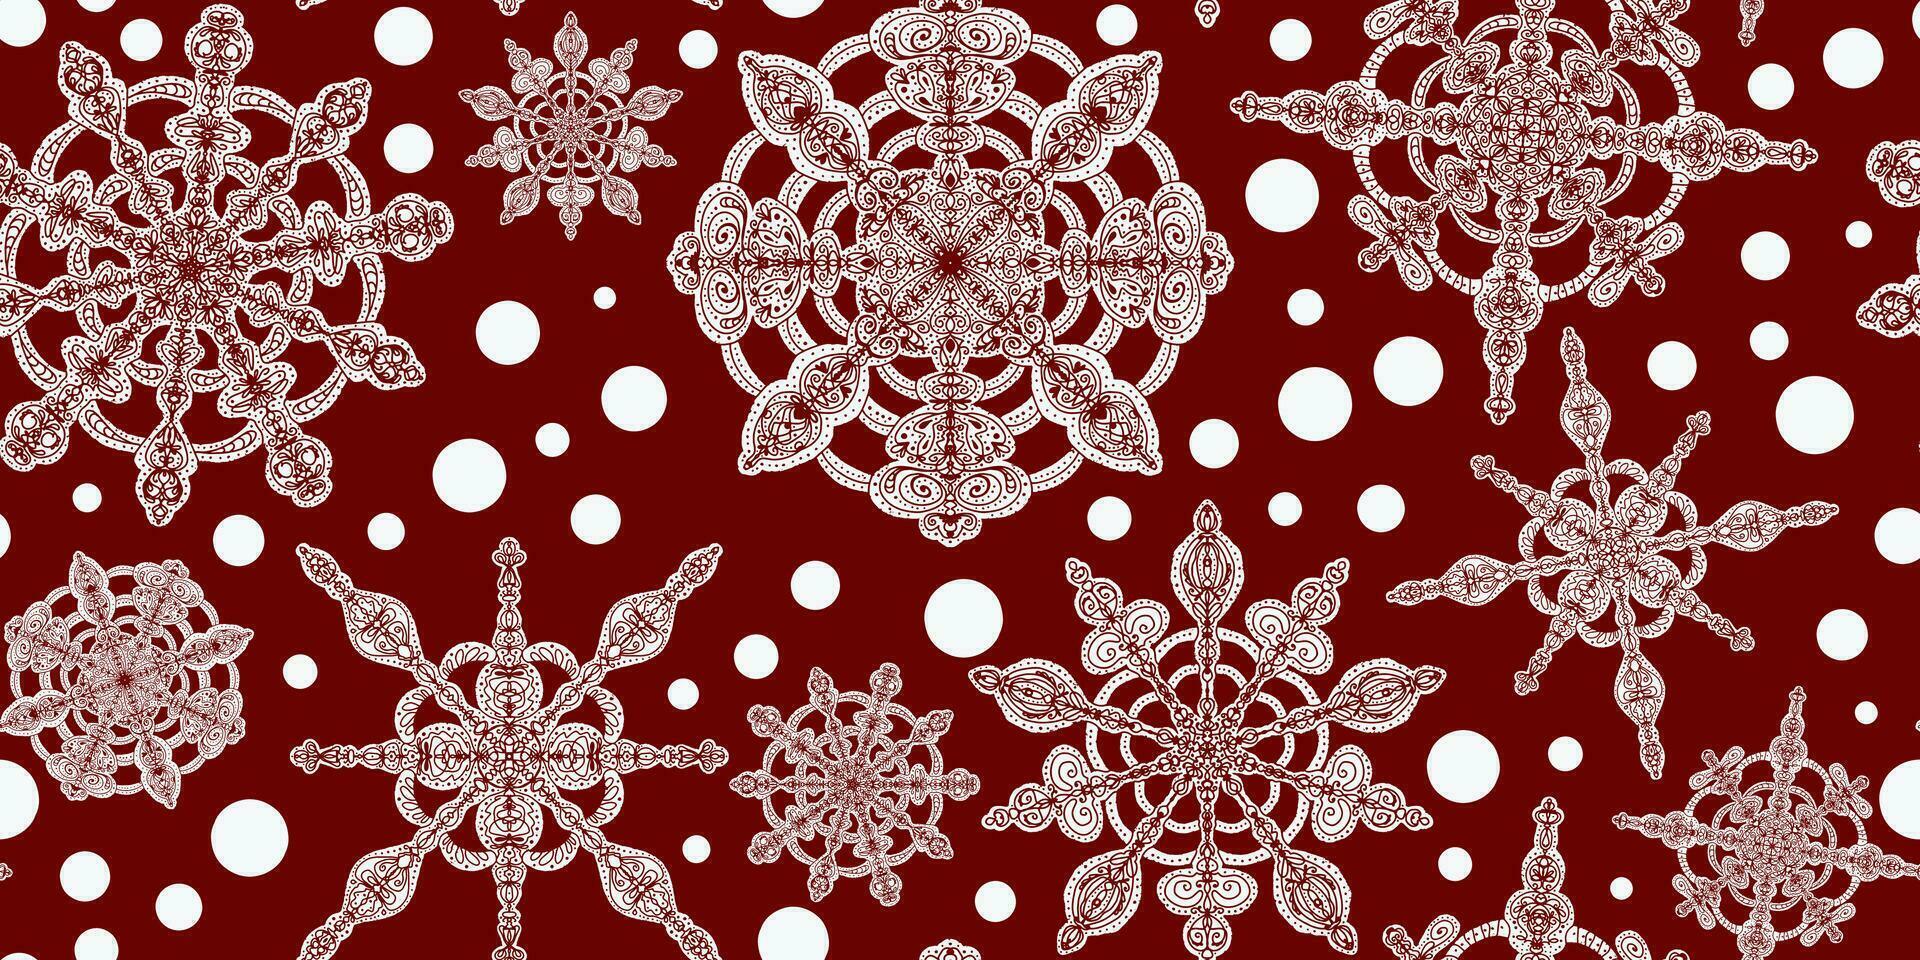 snowflakes on a red background vector